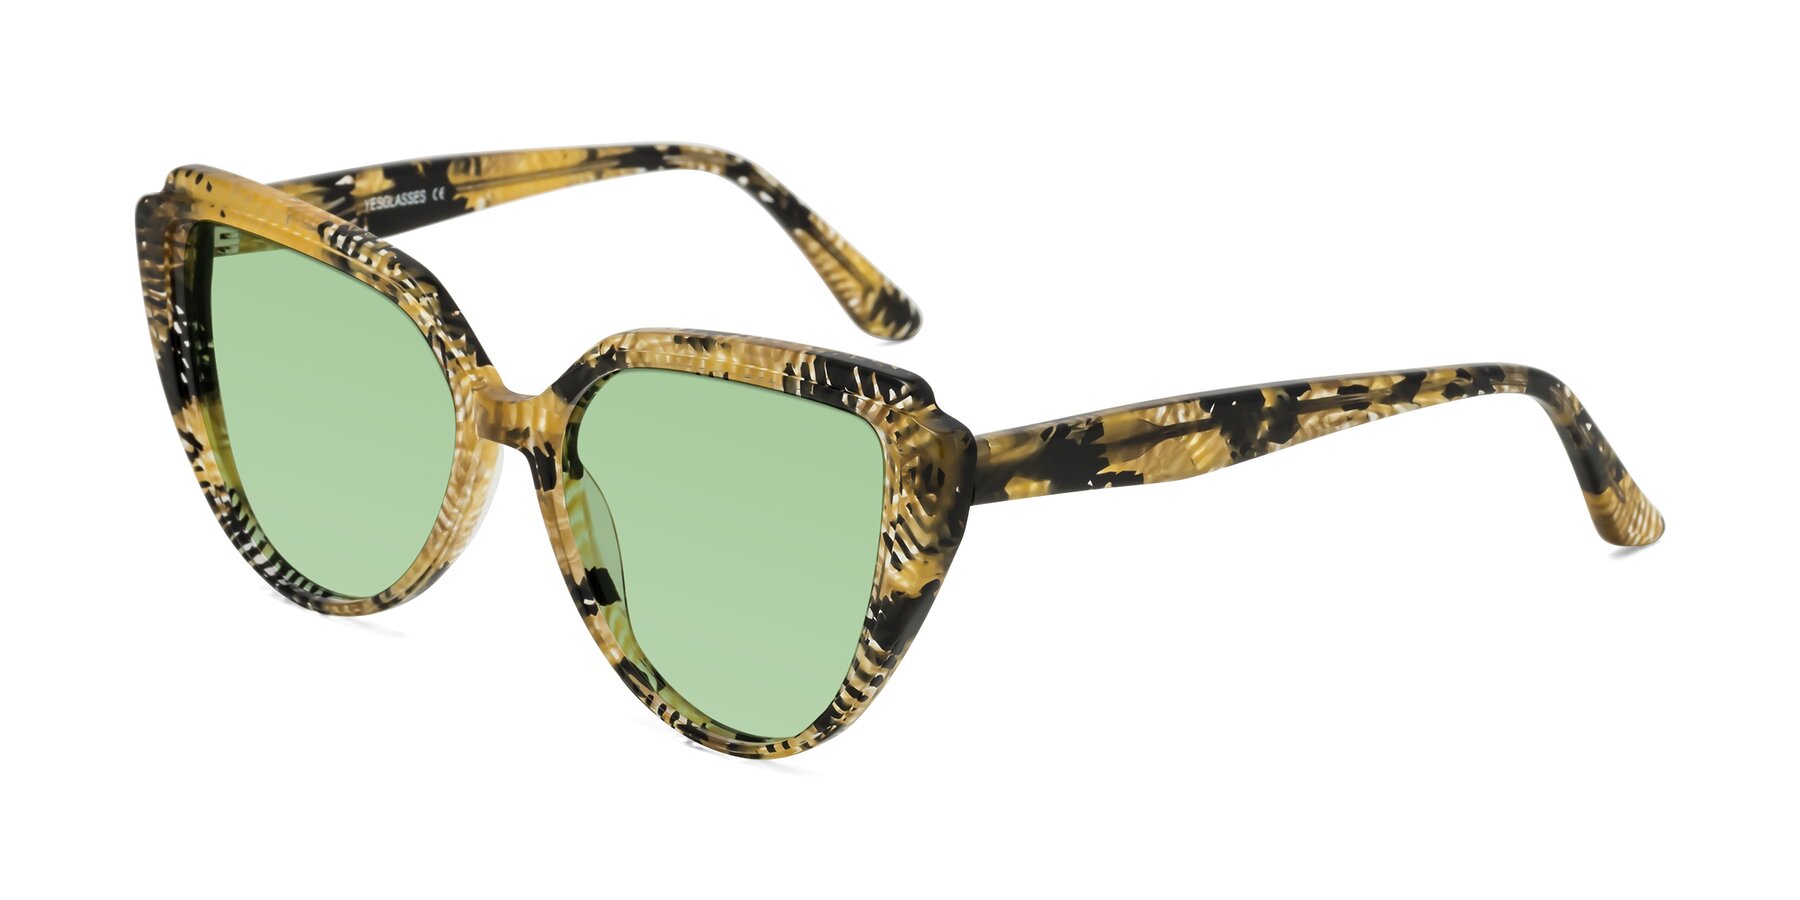 Angle of Zubar in Yellow Snake Print with Medium Green Tinted Lenses